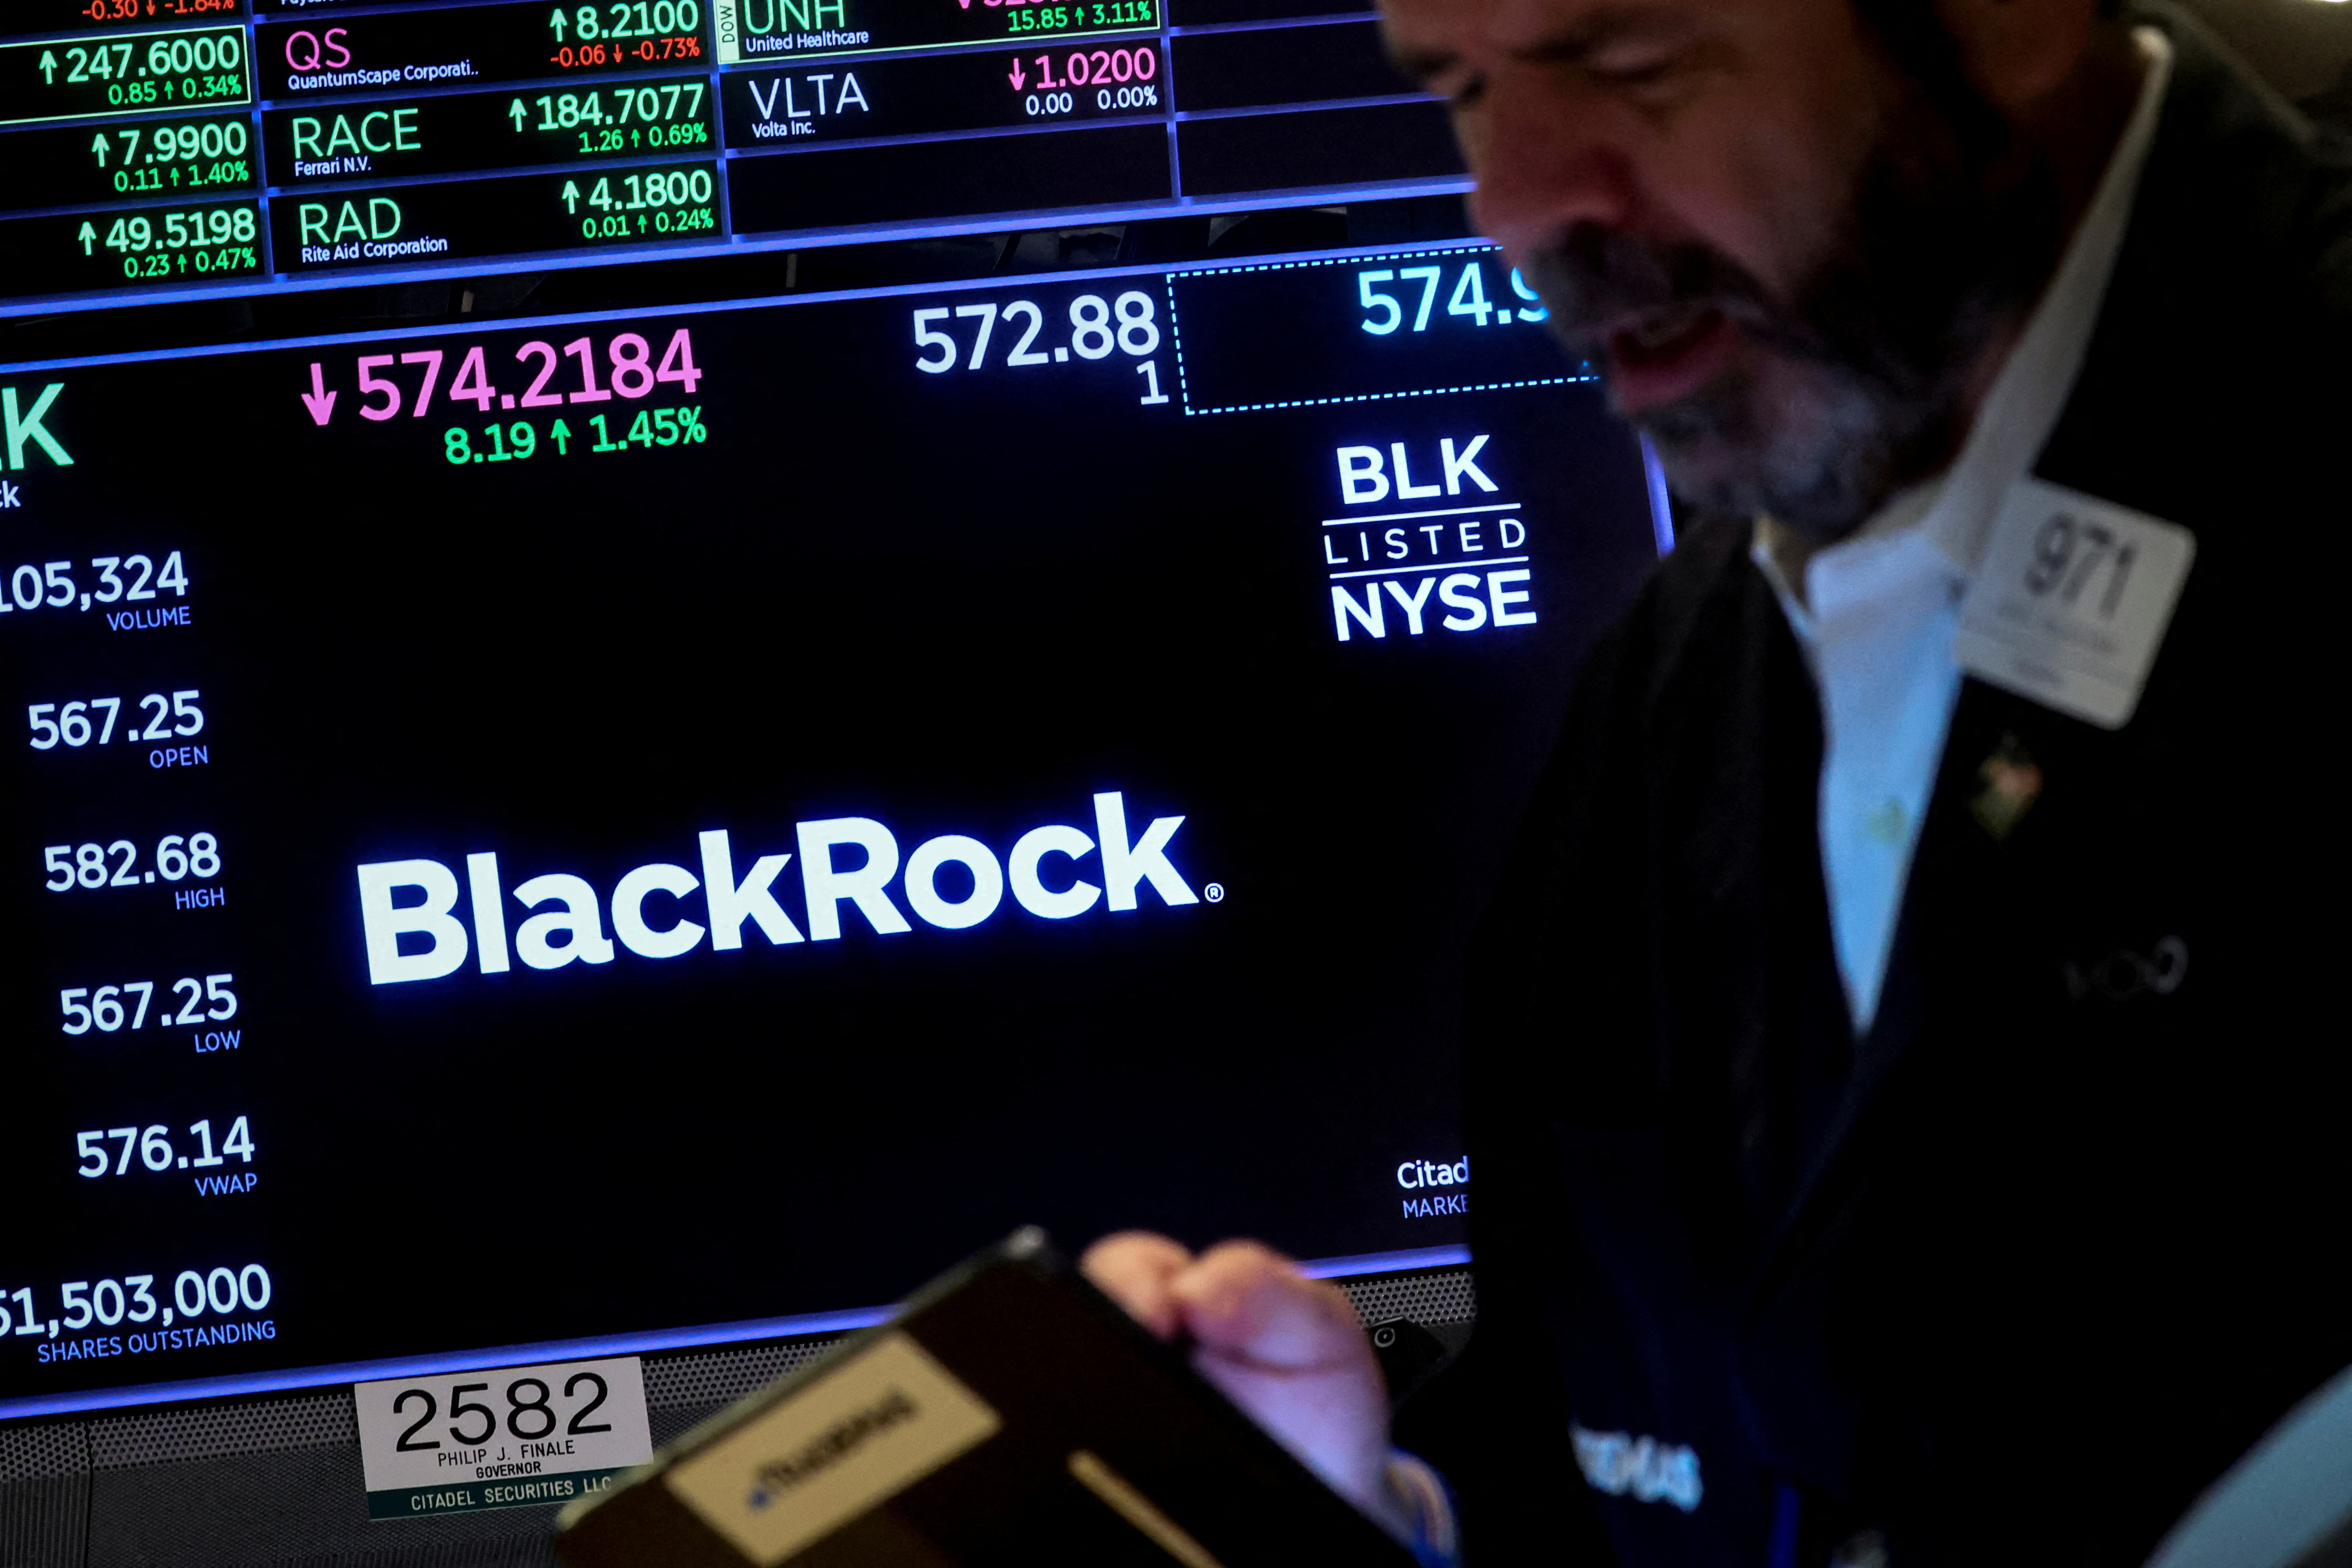 A trader works as a screen displays the trading information for BlackRock on the floor of the NYSE in New York